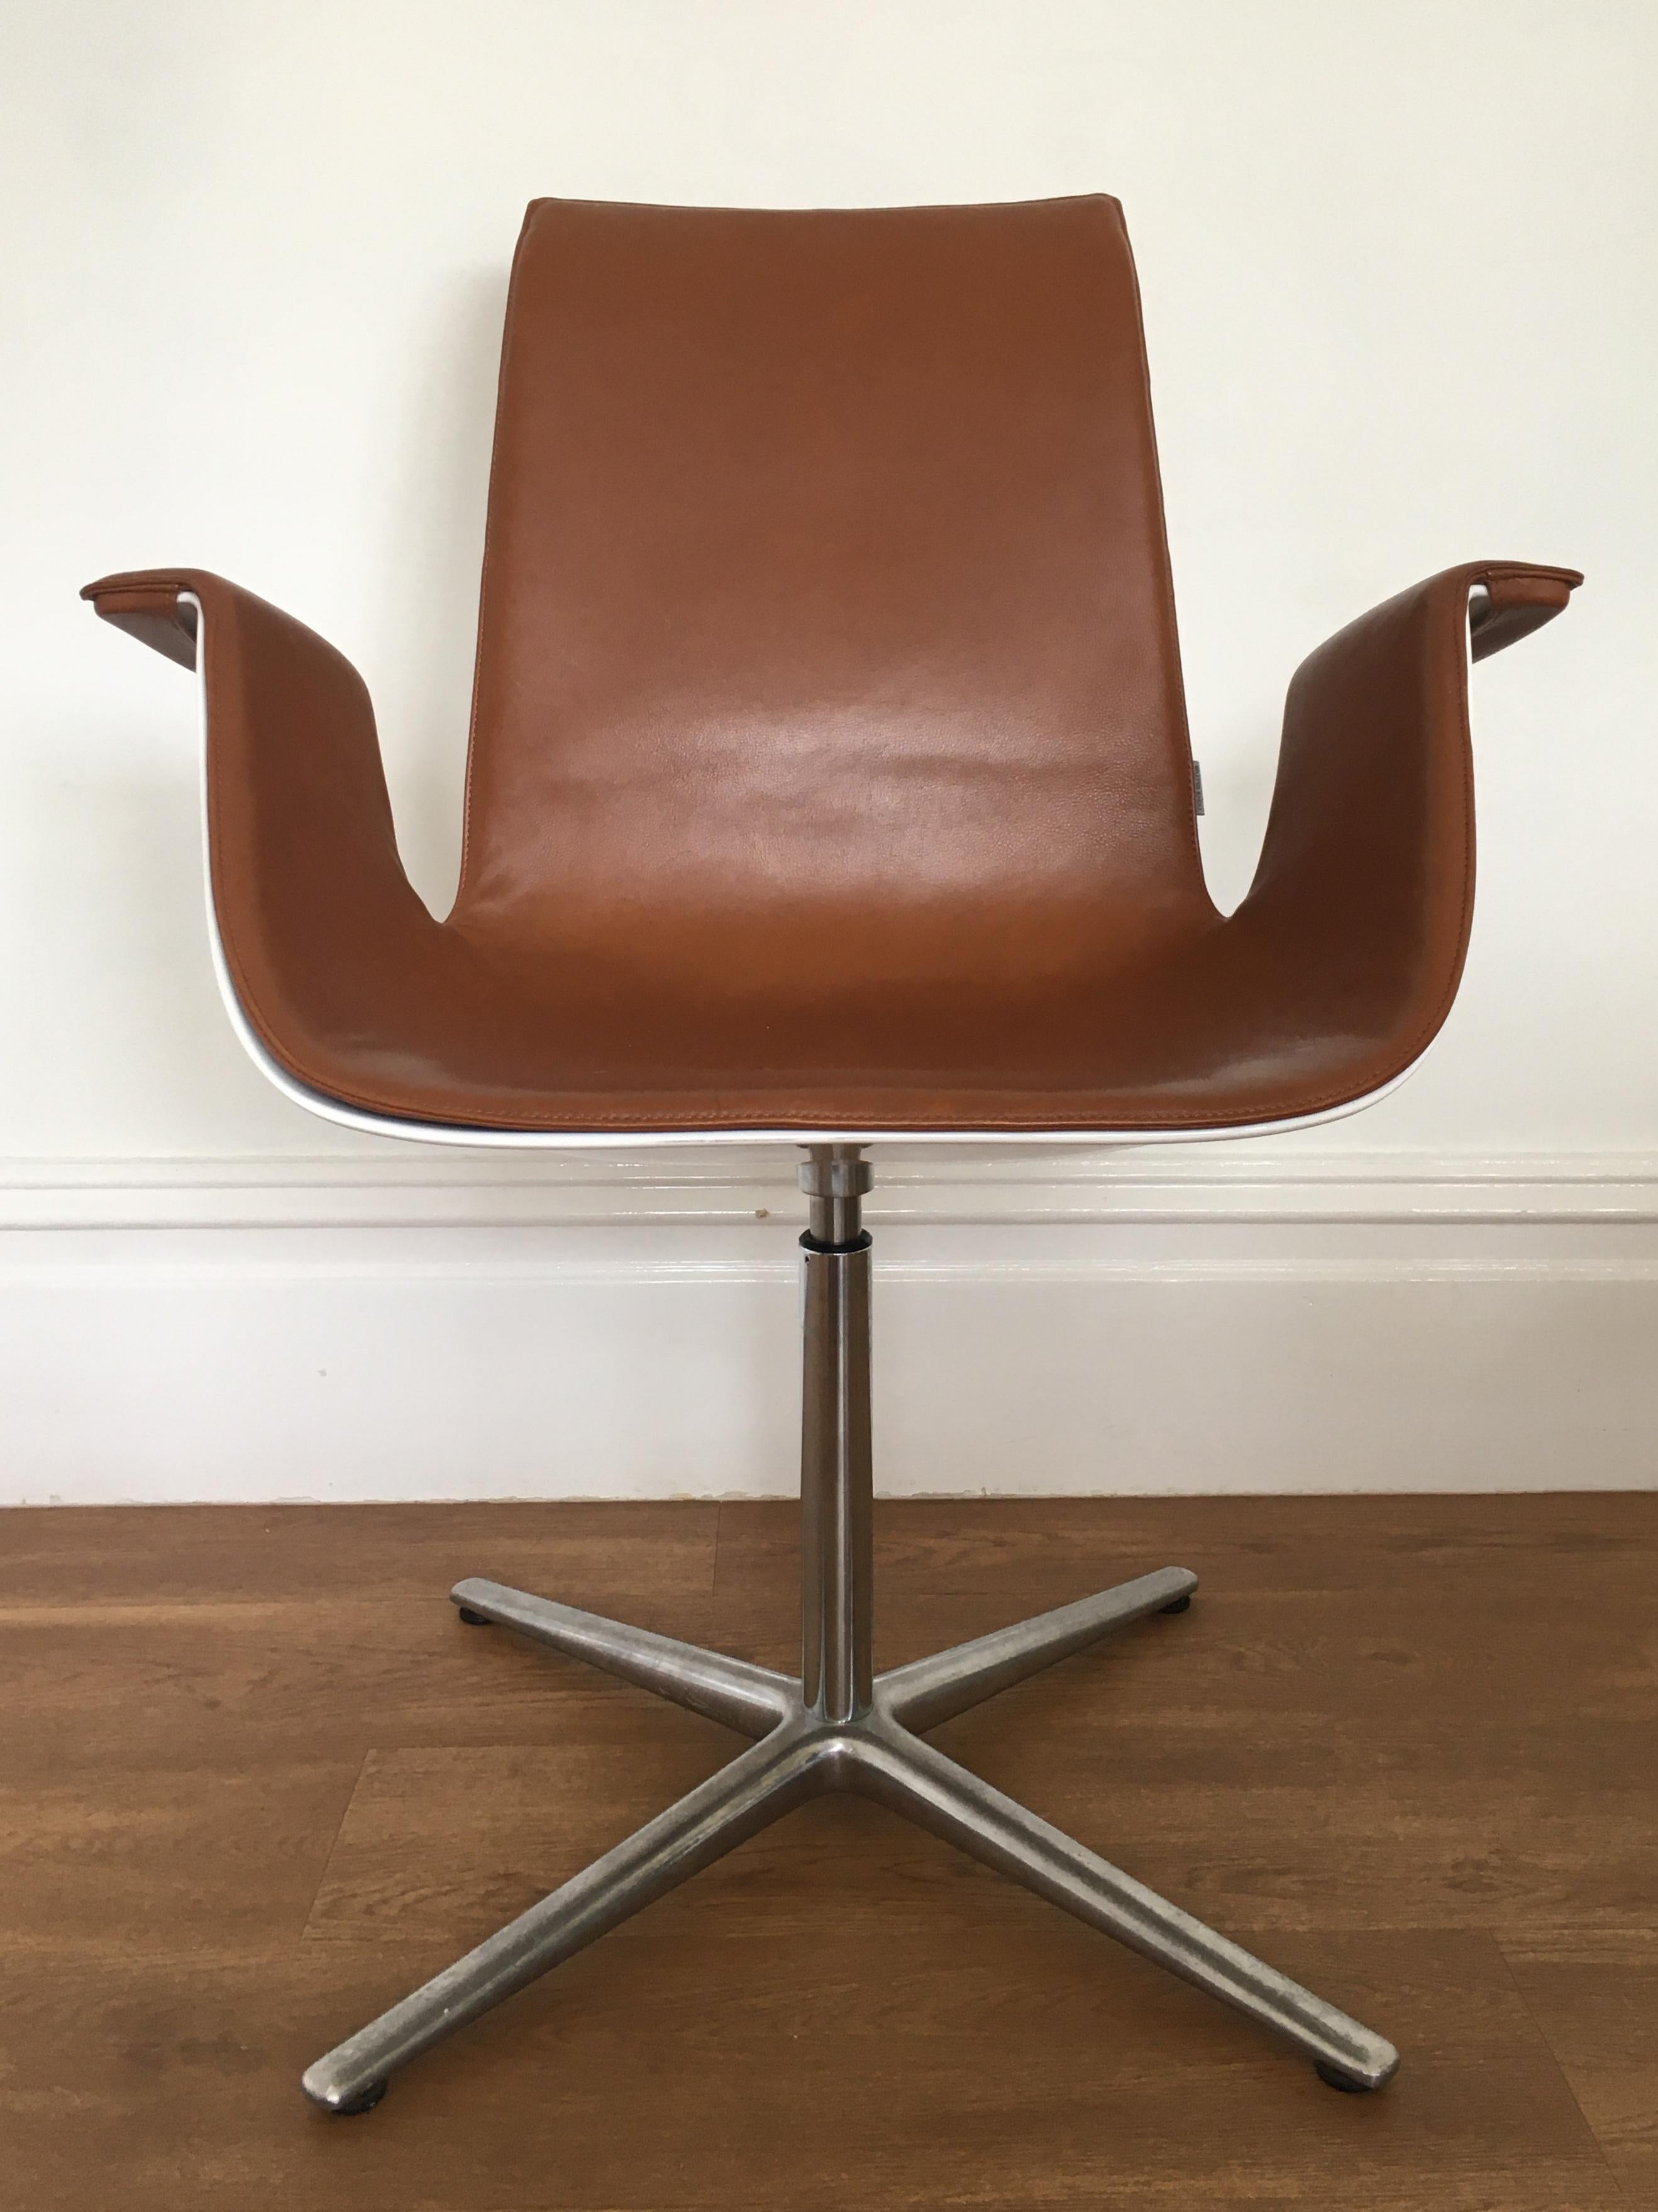 Originally designed in 1967 by Fabricius and Kastholm the FK bucket chair (also known as the bird chair) is one of the iconic, instantly recognisable, designs from the mid 20th century.

The chair features light tan leather upholstery with a white